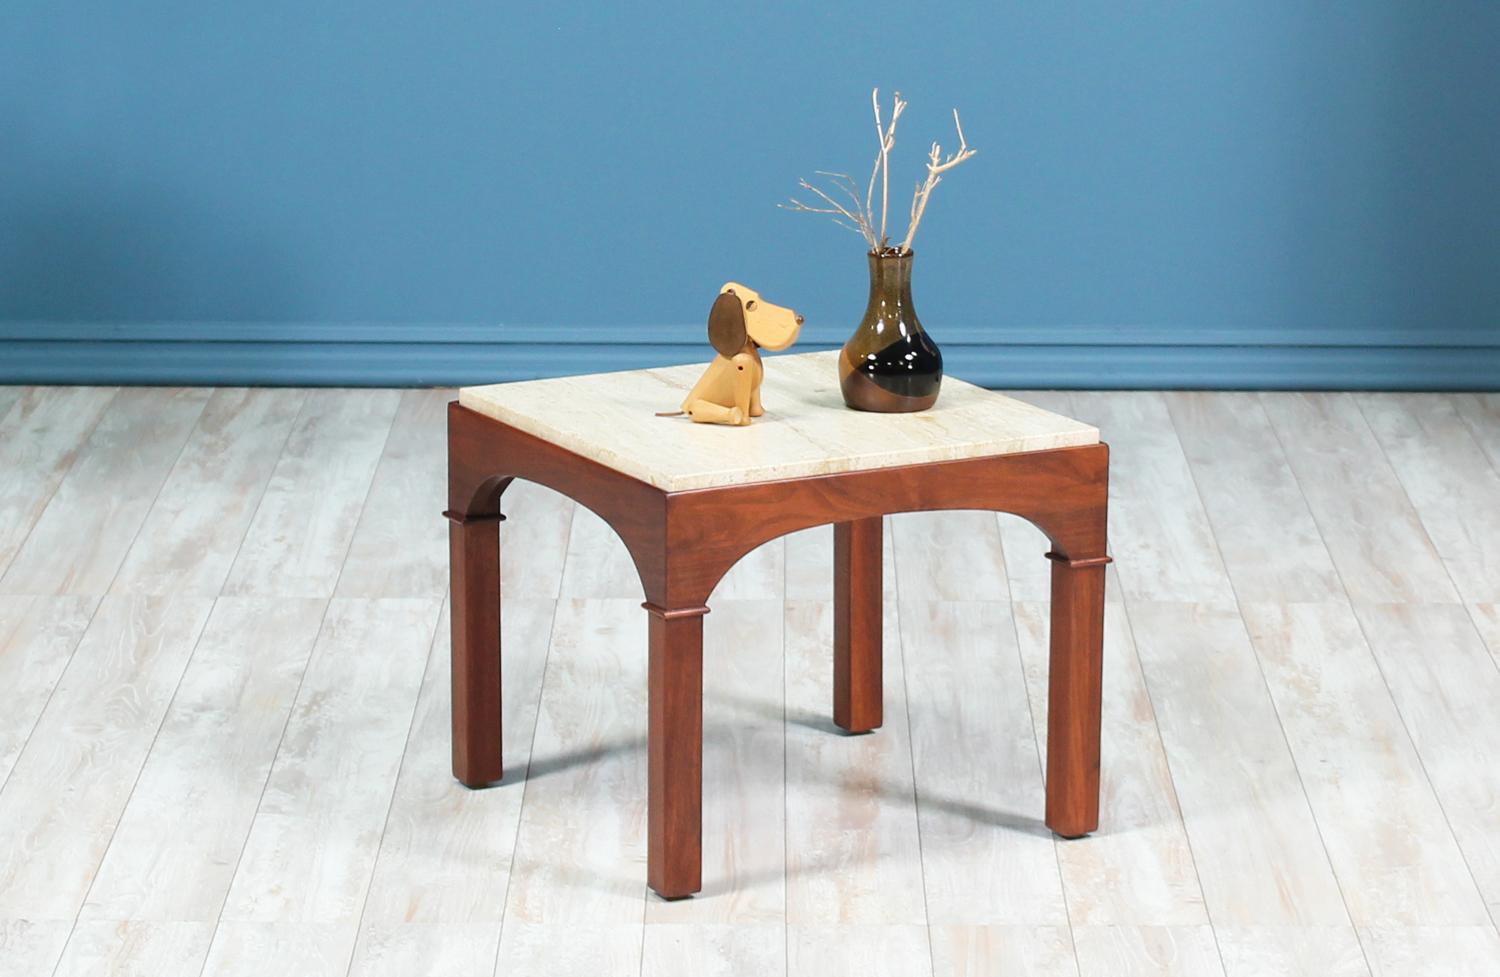 Stylish side table designed by John Keal and manufactured by Brown Saltman in the United States circa 1950’s. This unique design has been recently refinished by our skilled team of craftsmen and features its original travertine top in mint condition